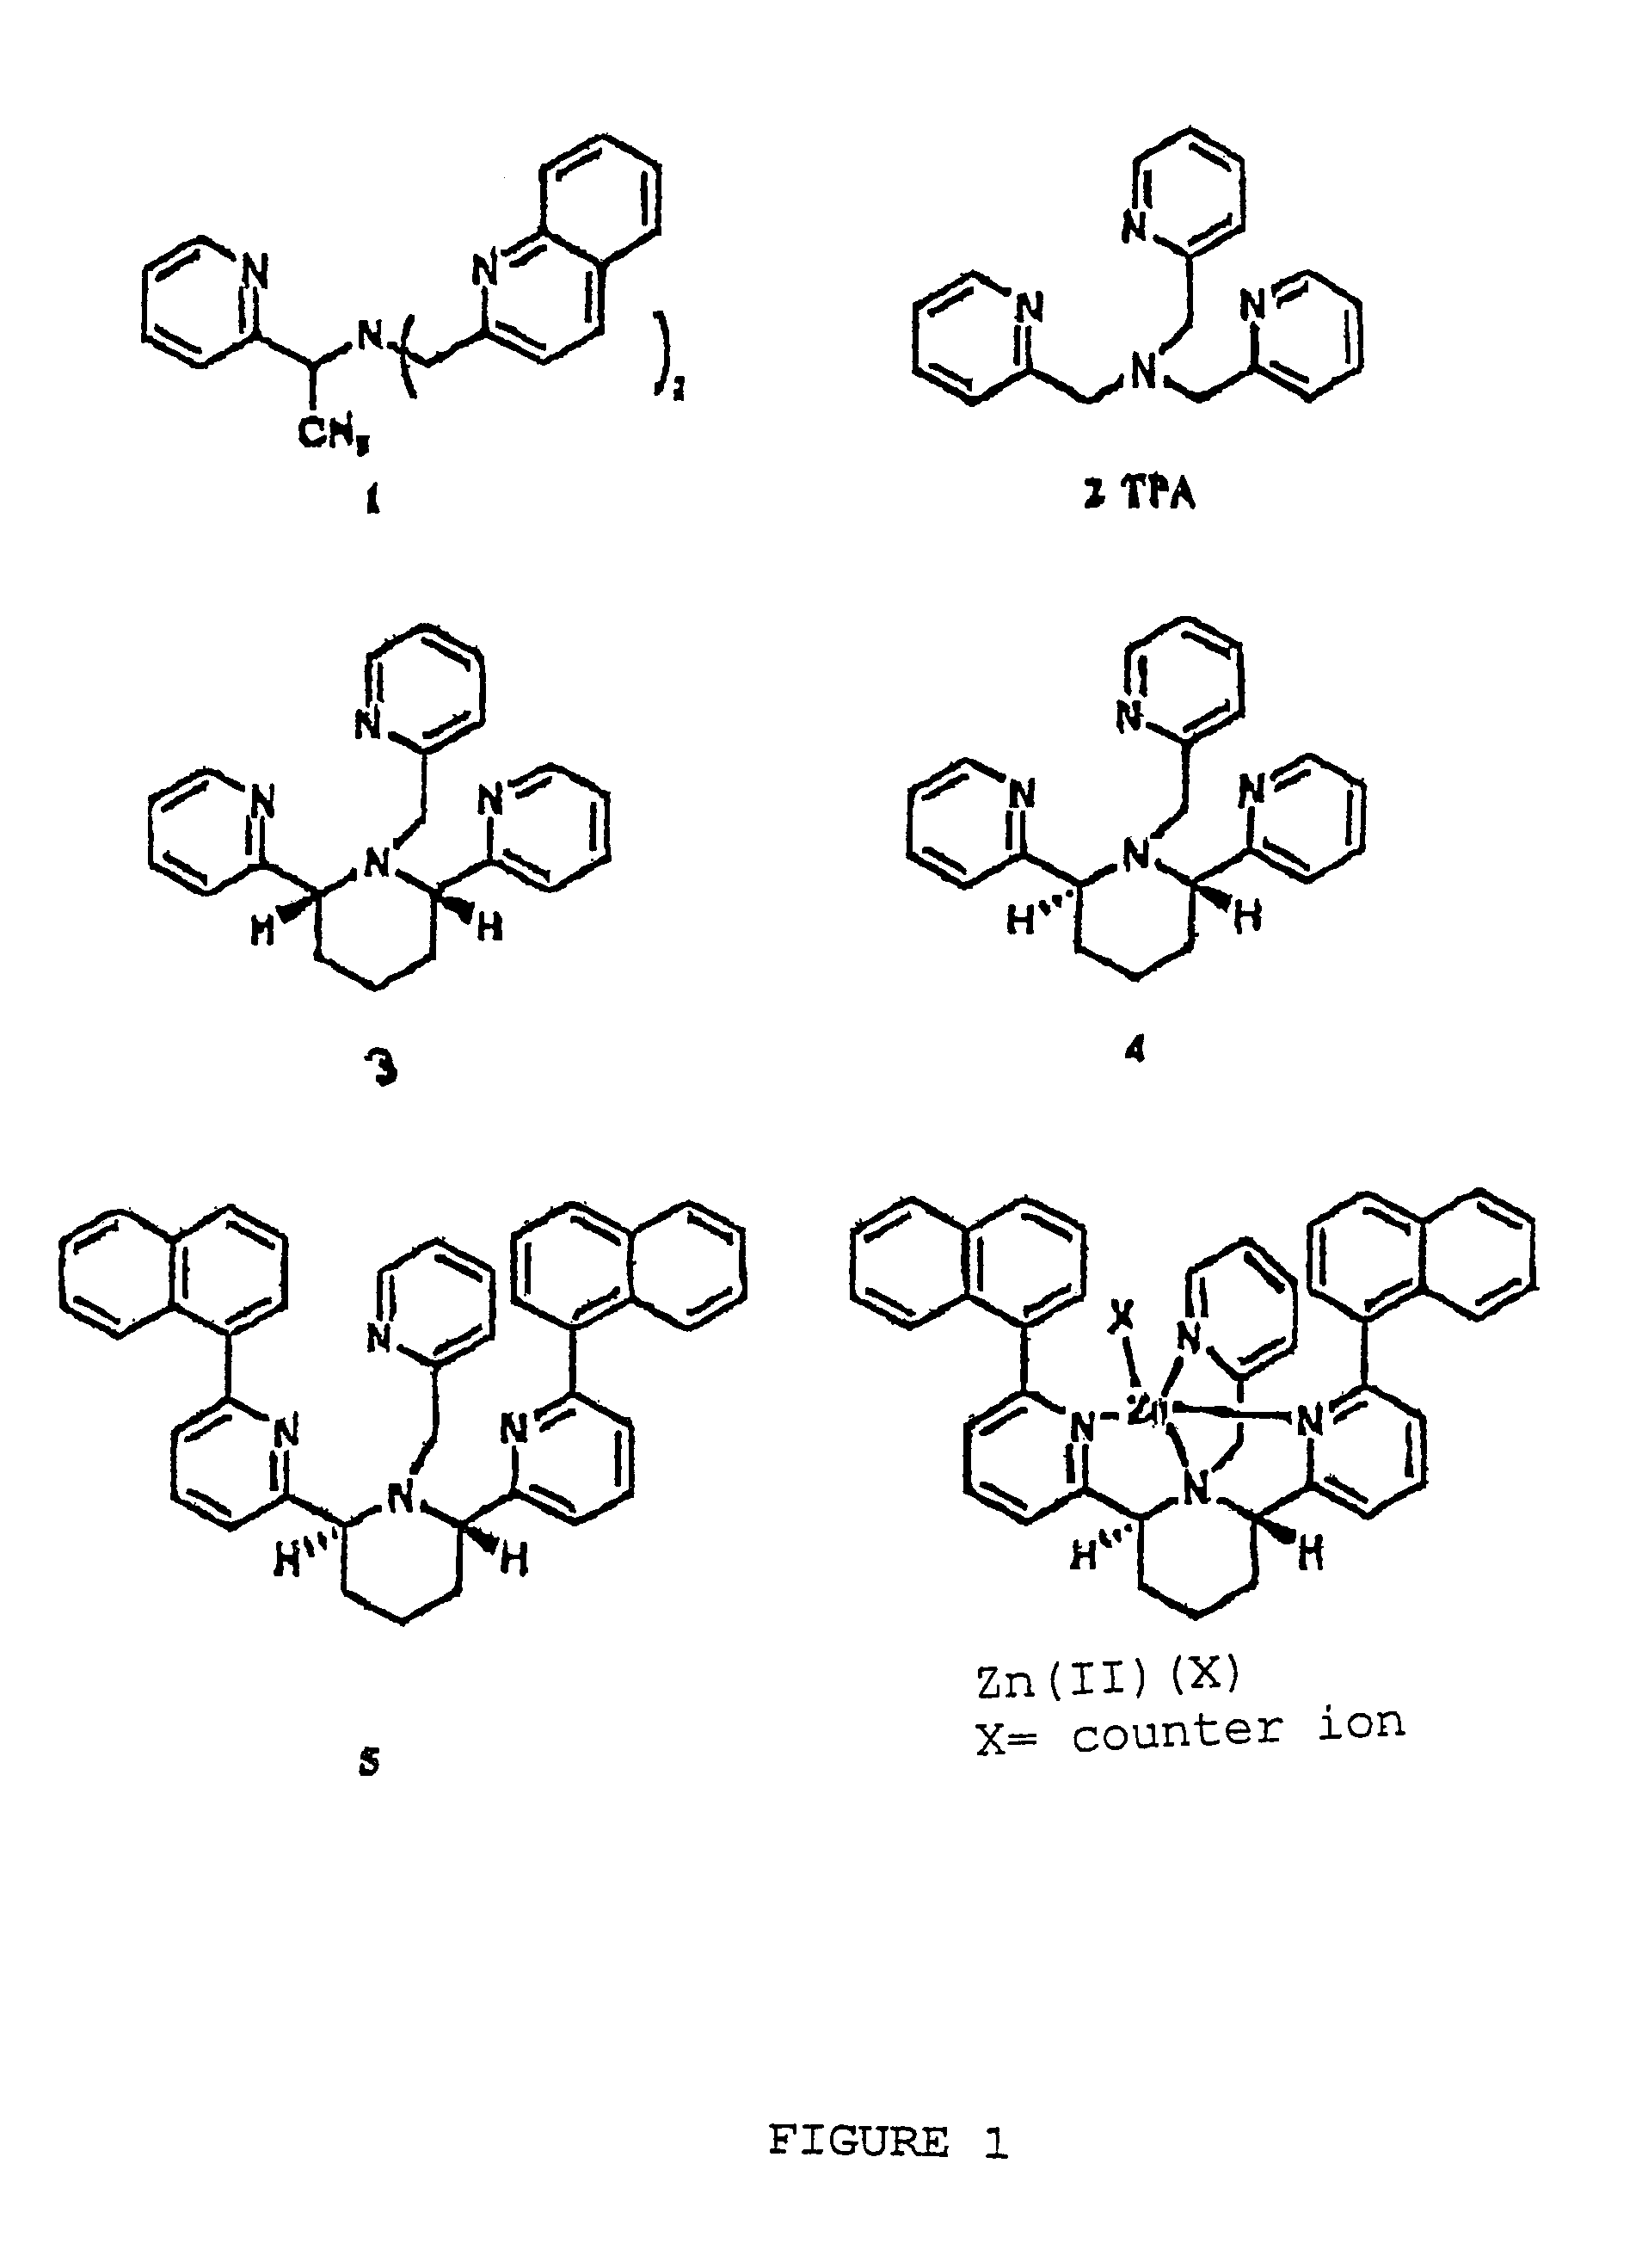 Chiral piperidine and quinucledine ligands